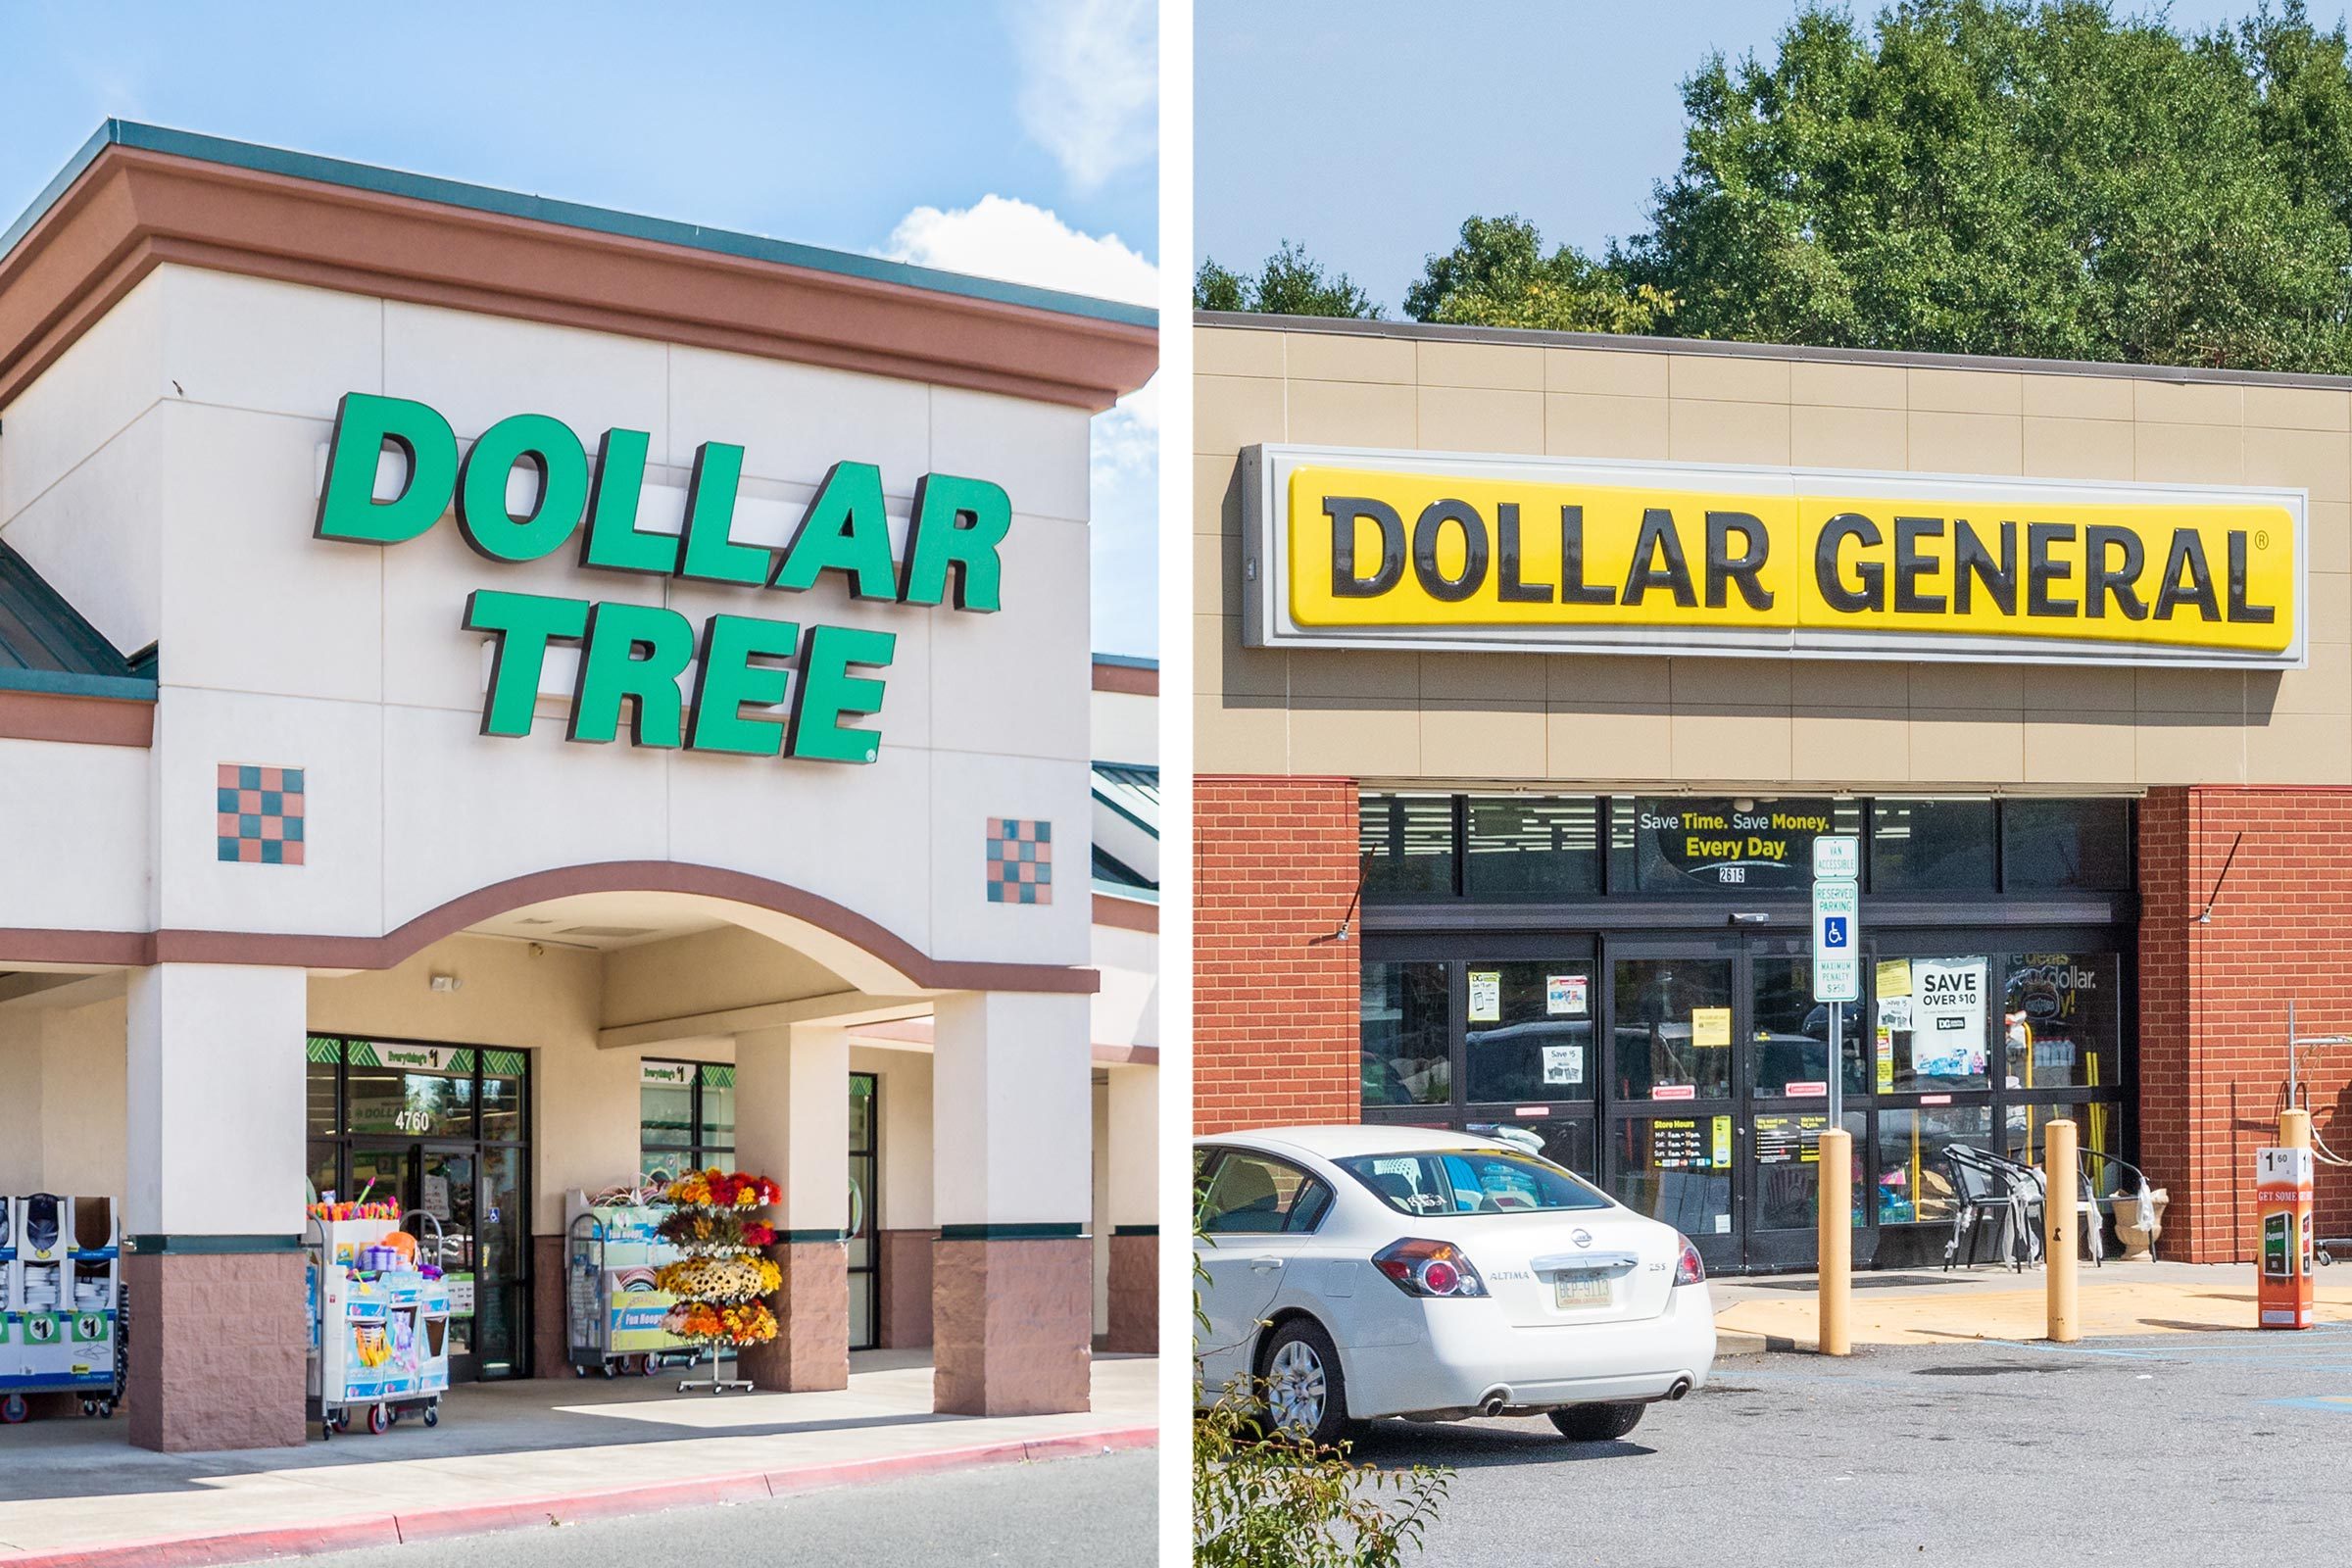 New Dollar Tree Plus ($3 & $5 items) Section That I Saw A Couple Months Ago  : r/DollarTree